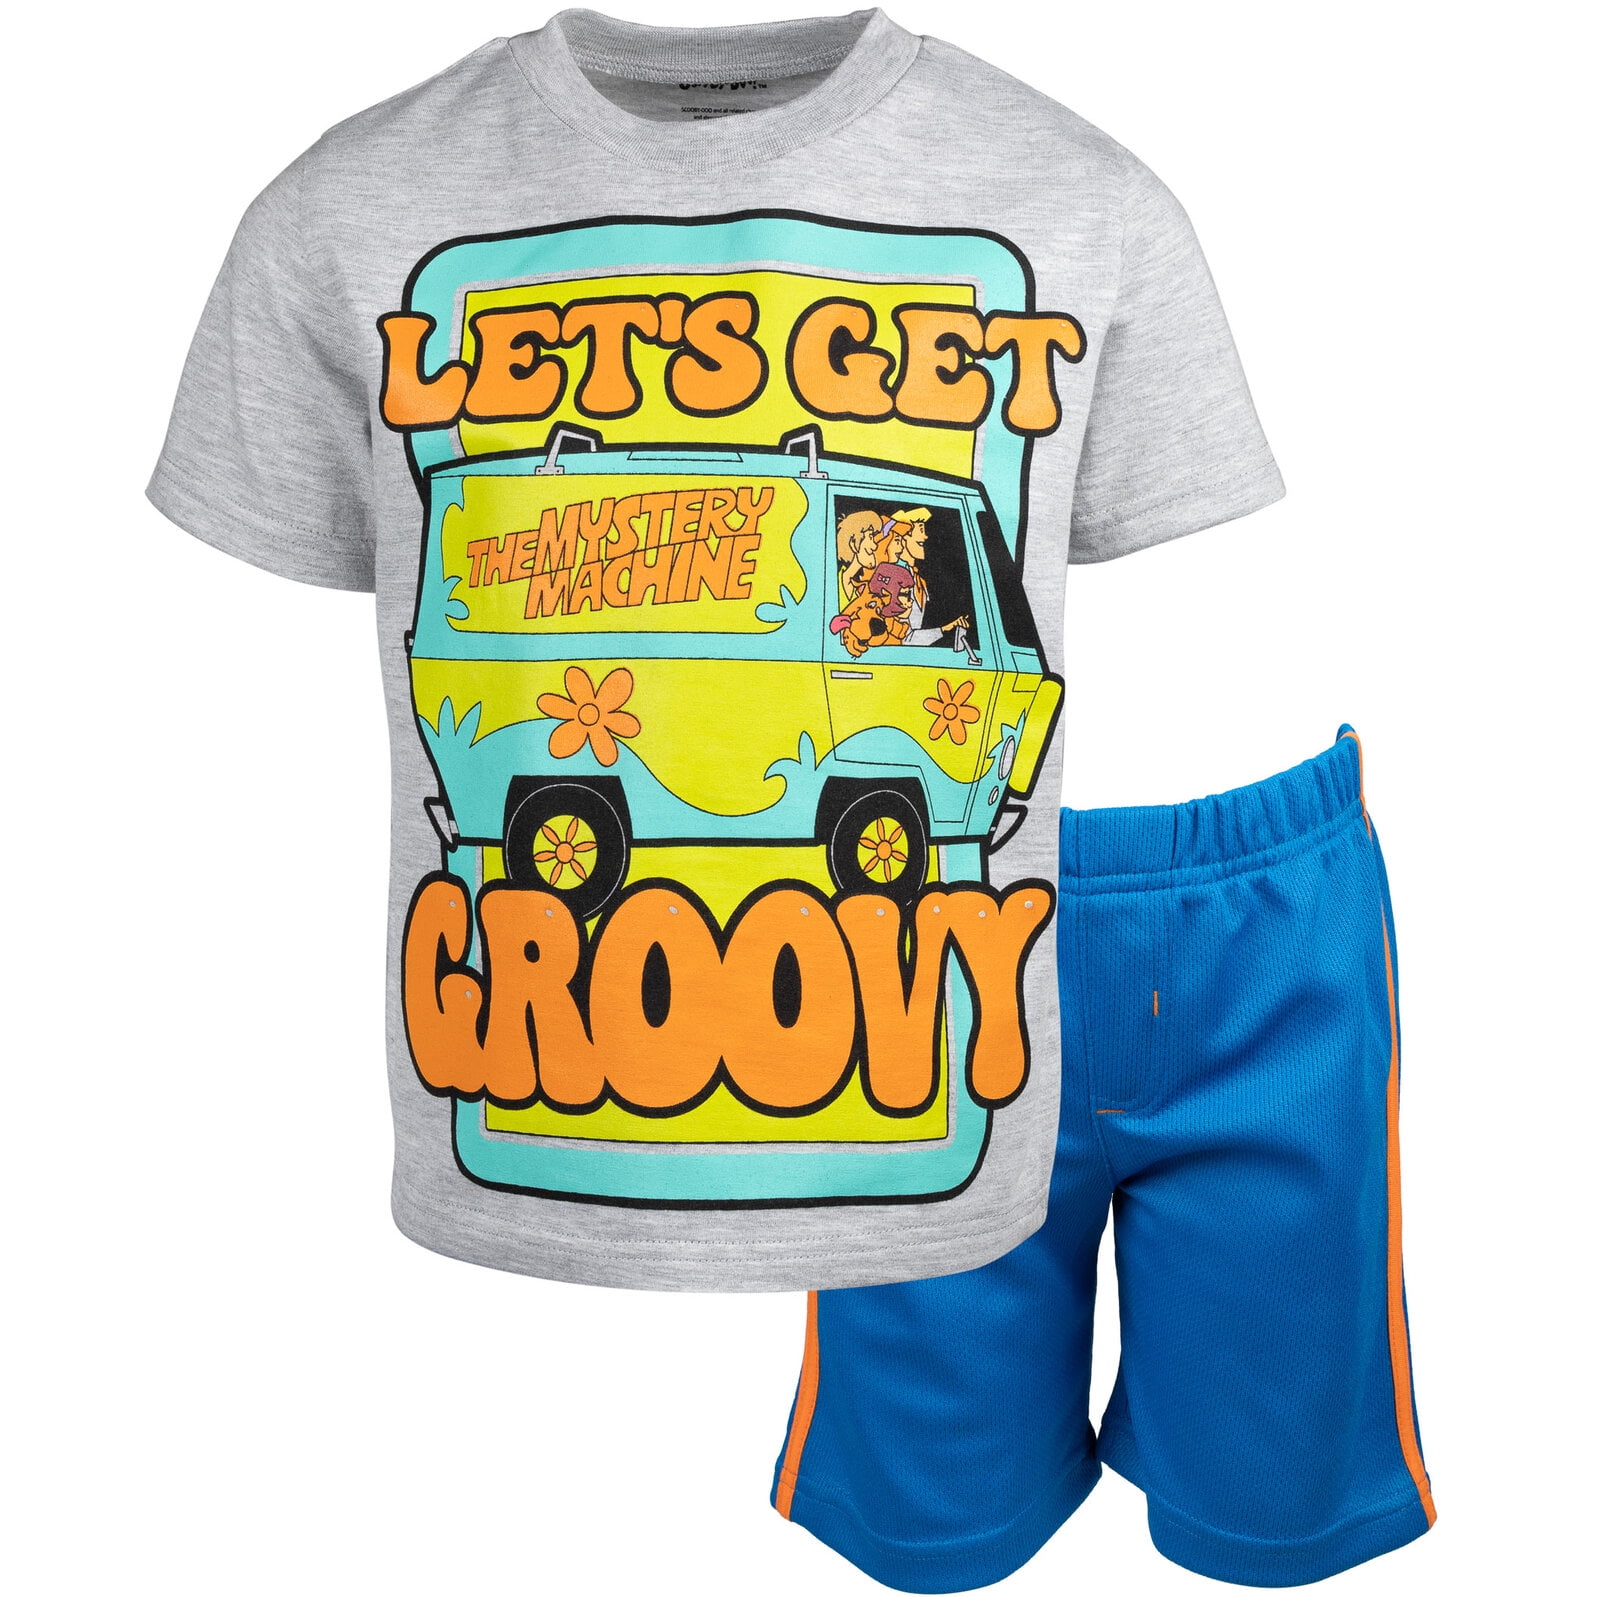 Scooby-Doo Scooby Doo Little Boys T-Shirt and Mesh Shorts Outfit Set  Toddler to Big Kid | T-Shirts